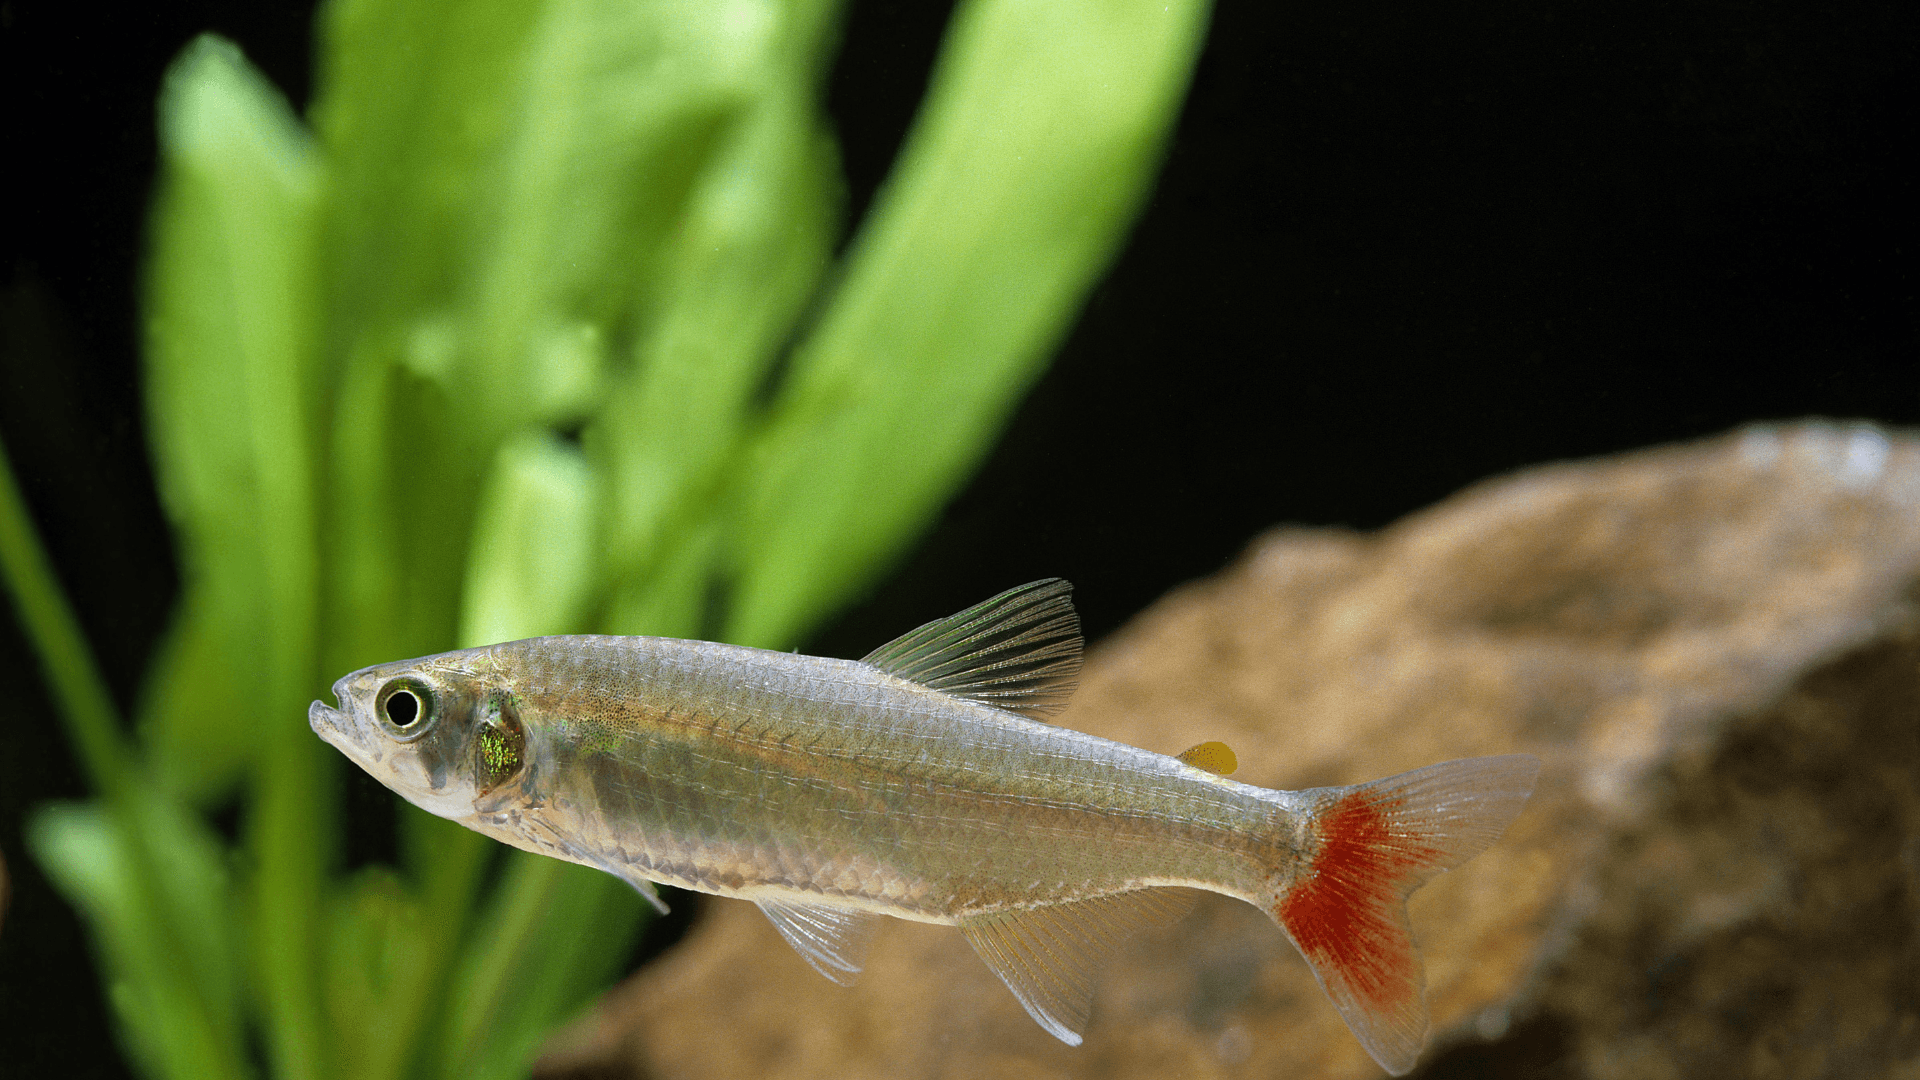 A photo of Bloodfin tetra